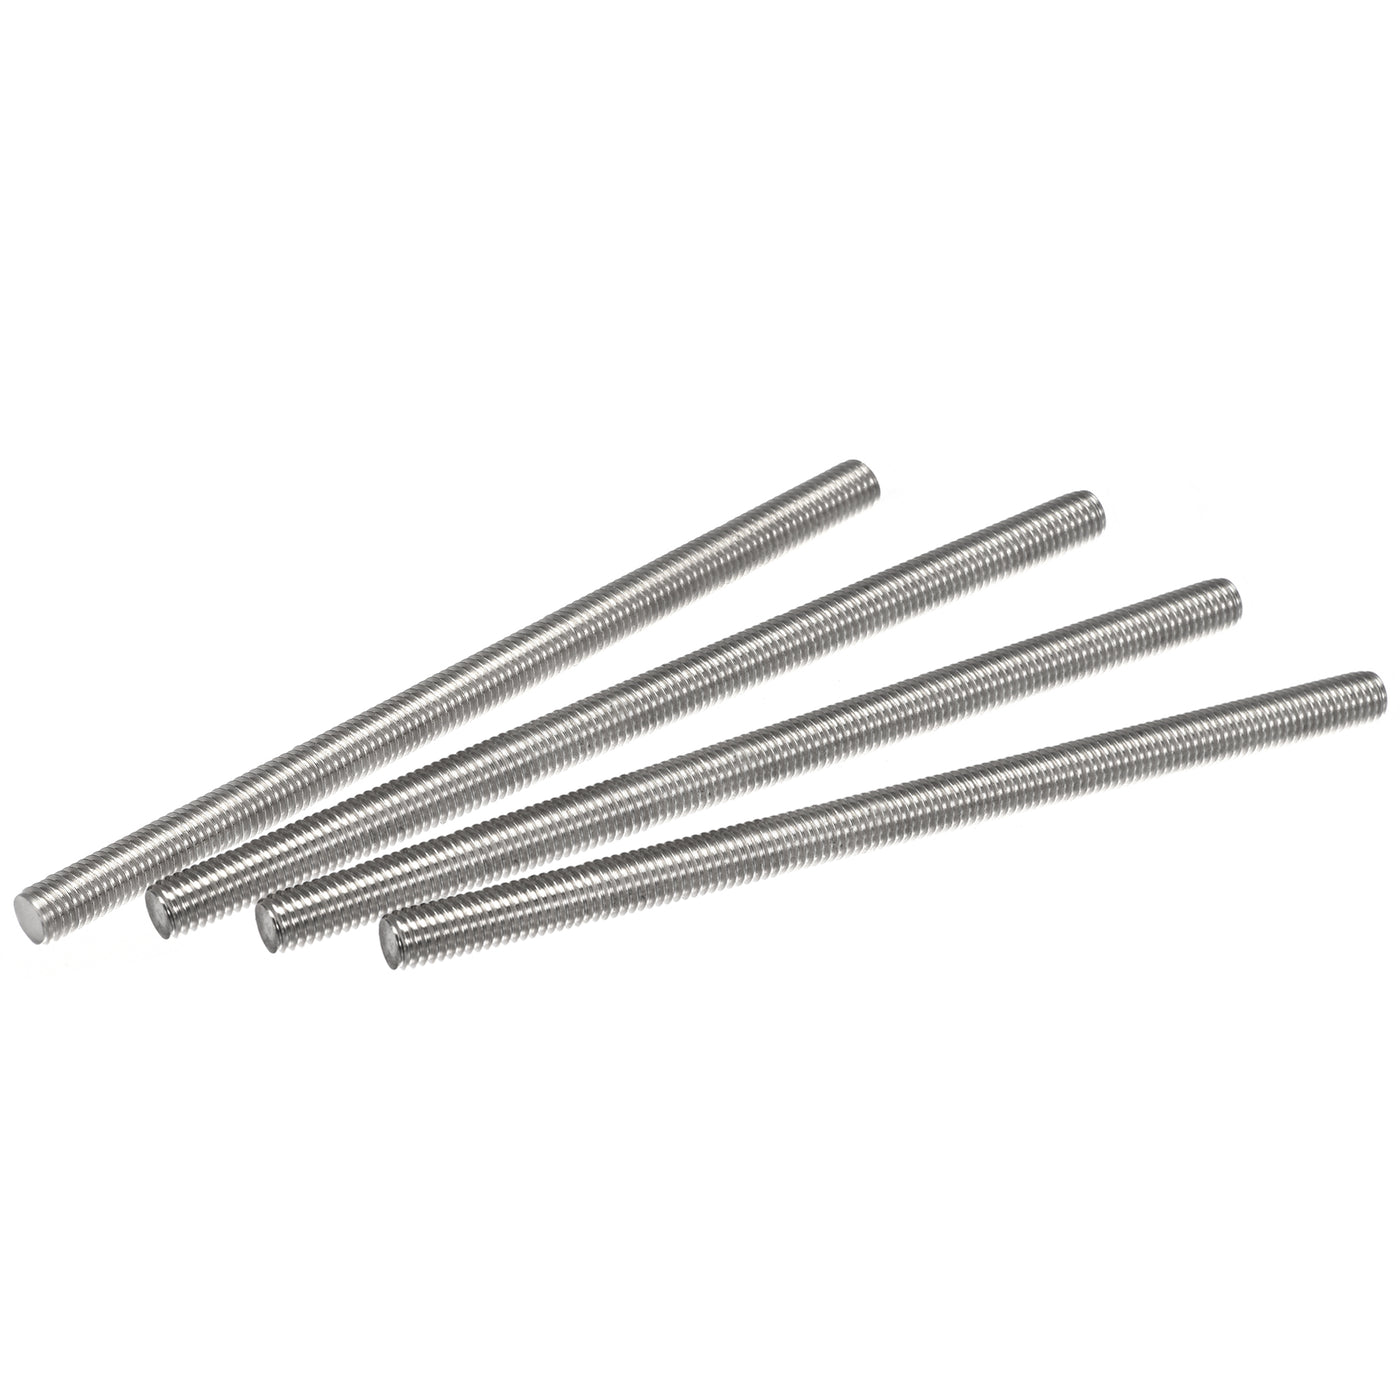 uxcell Uxcell 4pcs M8 x 150mm Fully Threaded Rod 304 Stainless Steel Right Hand Threads